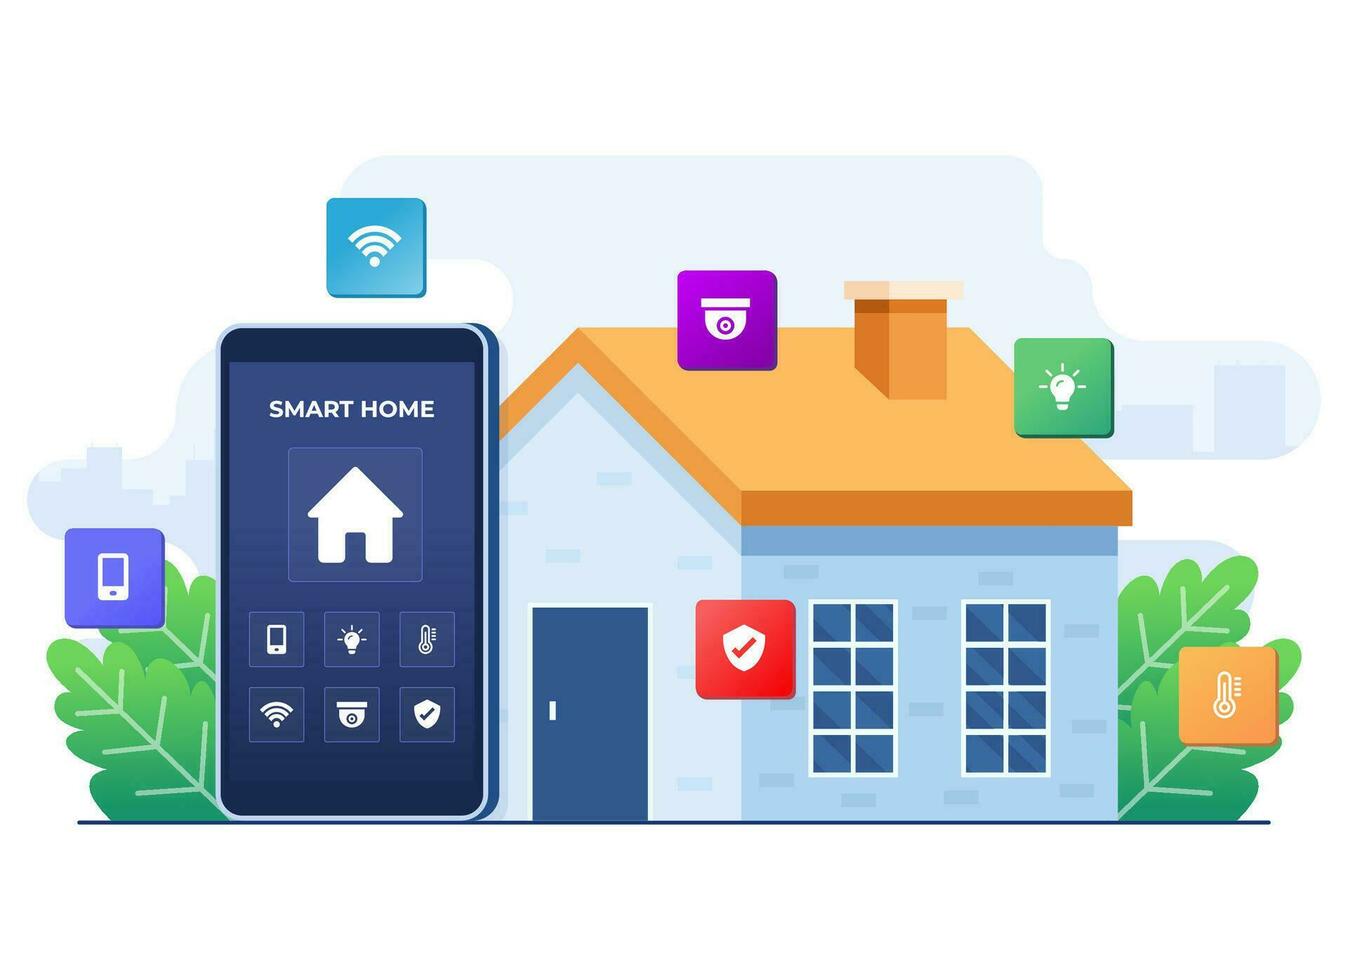 Smart home application concept flat illustration, Home automation, Controlling house devices using smartphone, Remote home control technology, house technology system with wireless centralized control vector